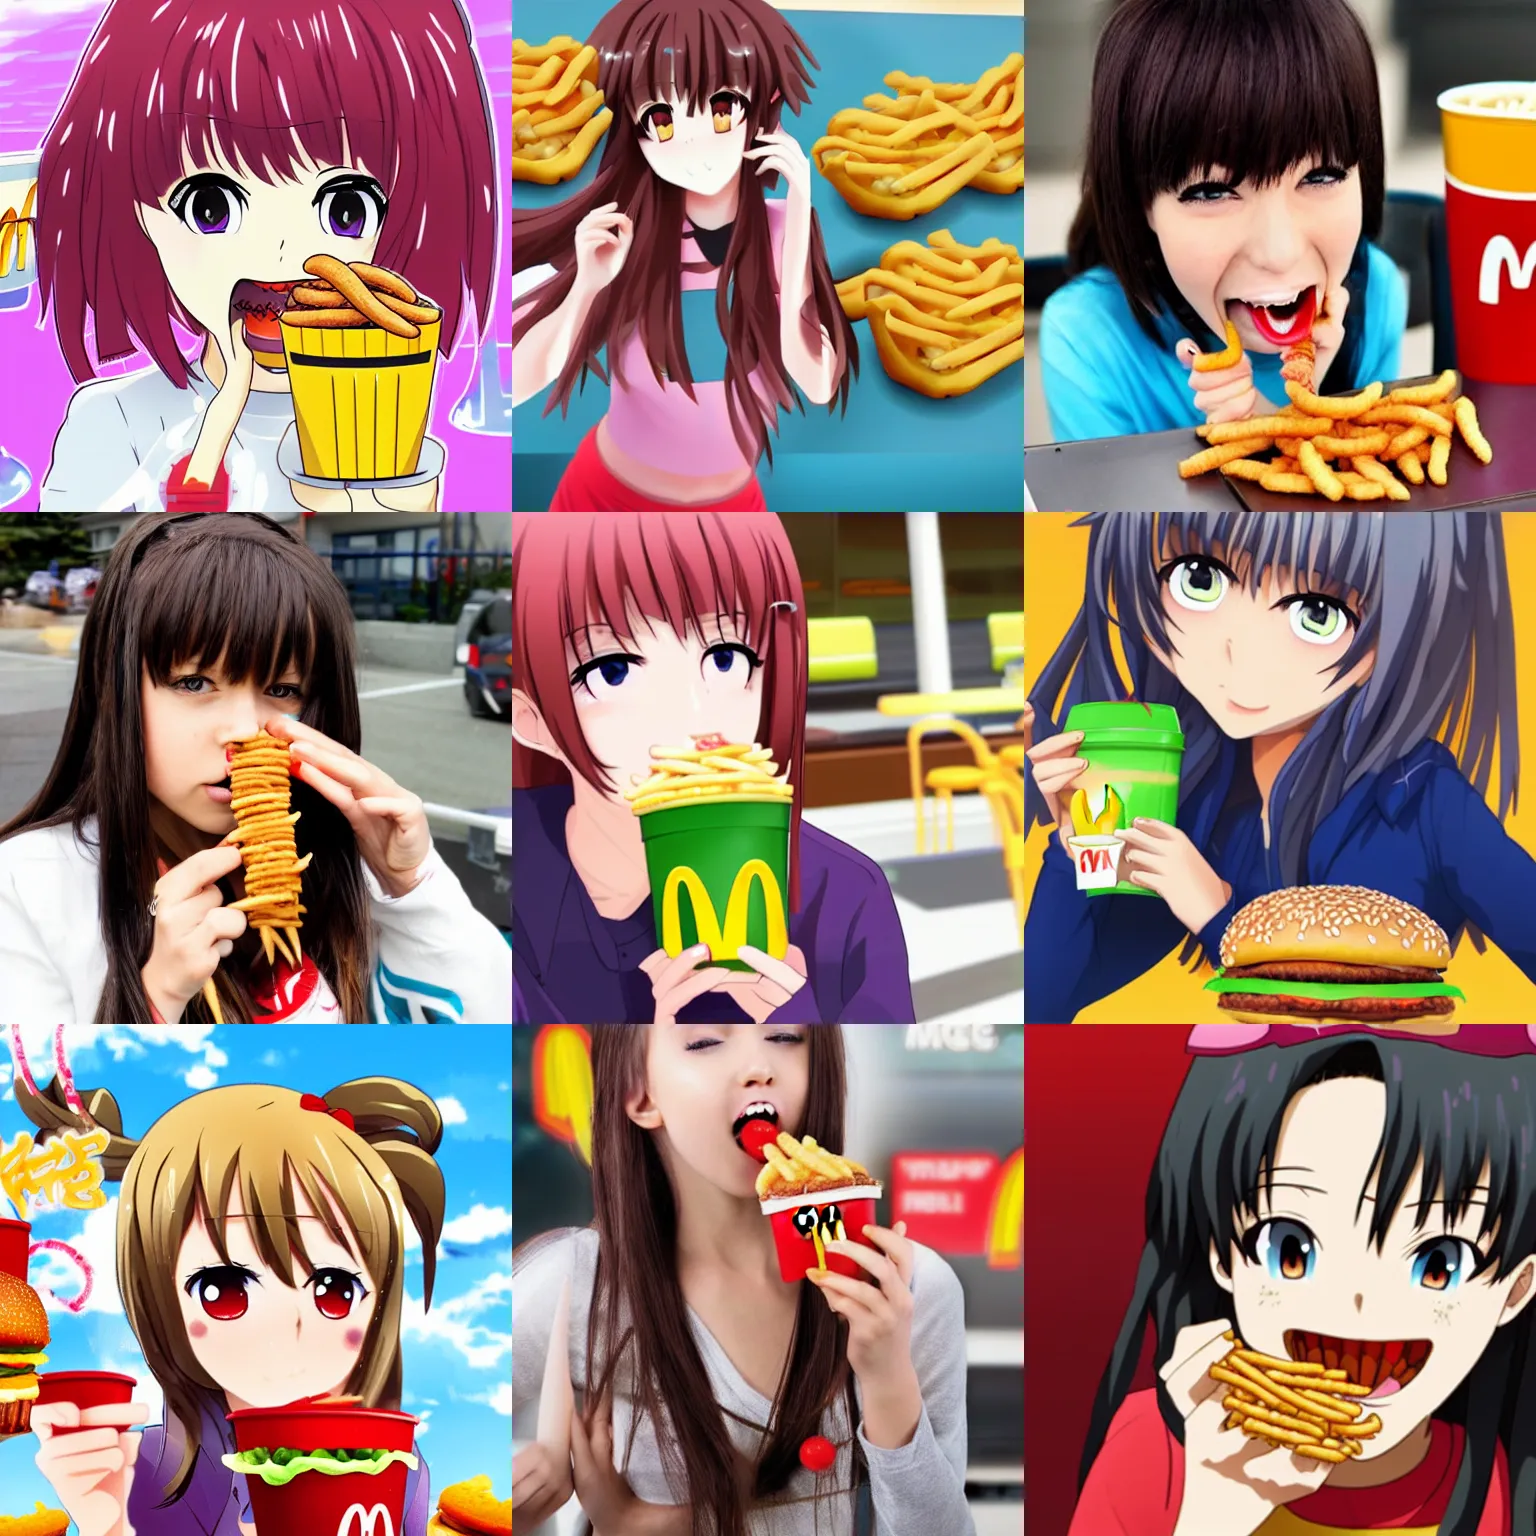 McDonald's Japan Releases New Anime Short Featuring AKB48 - oprainfall